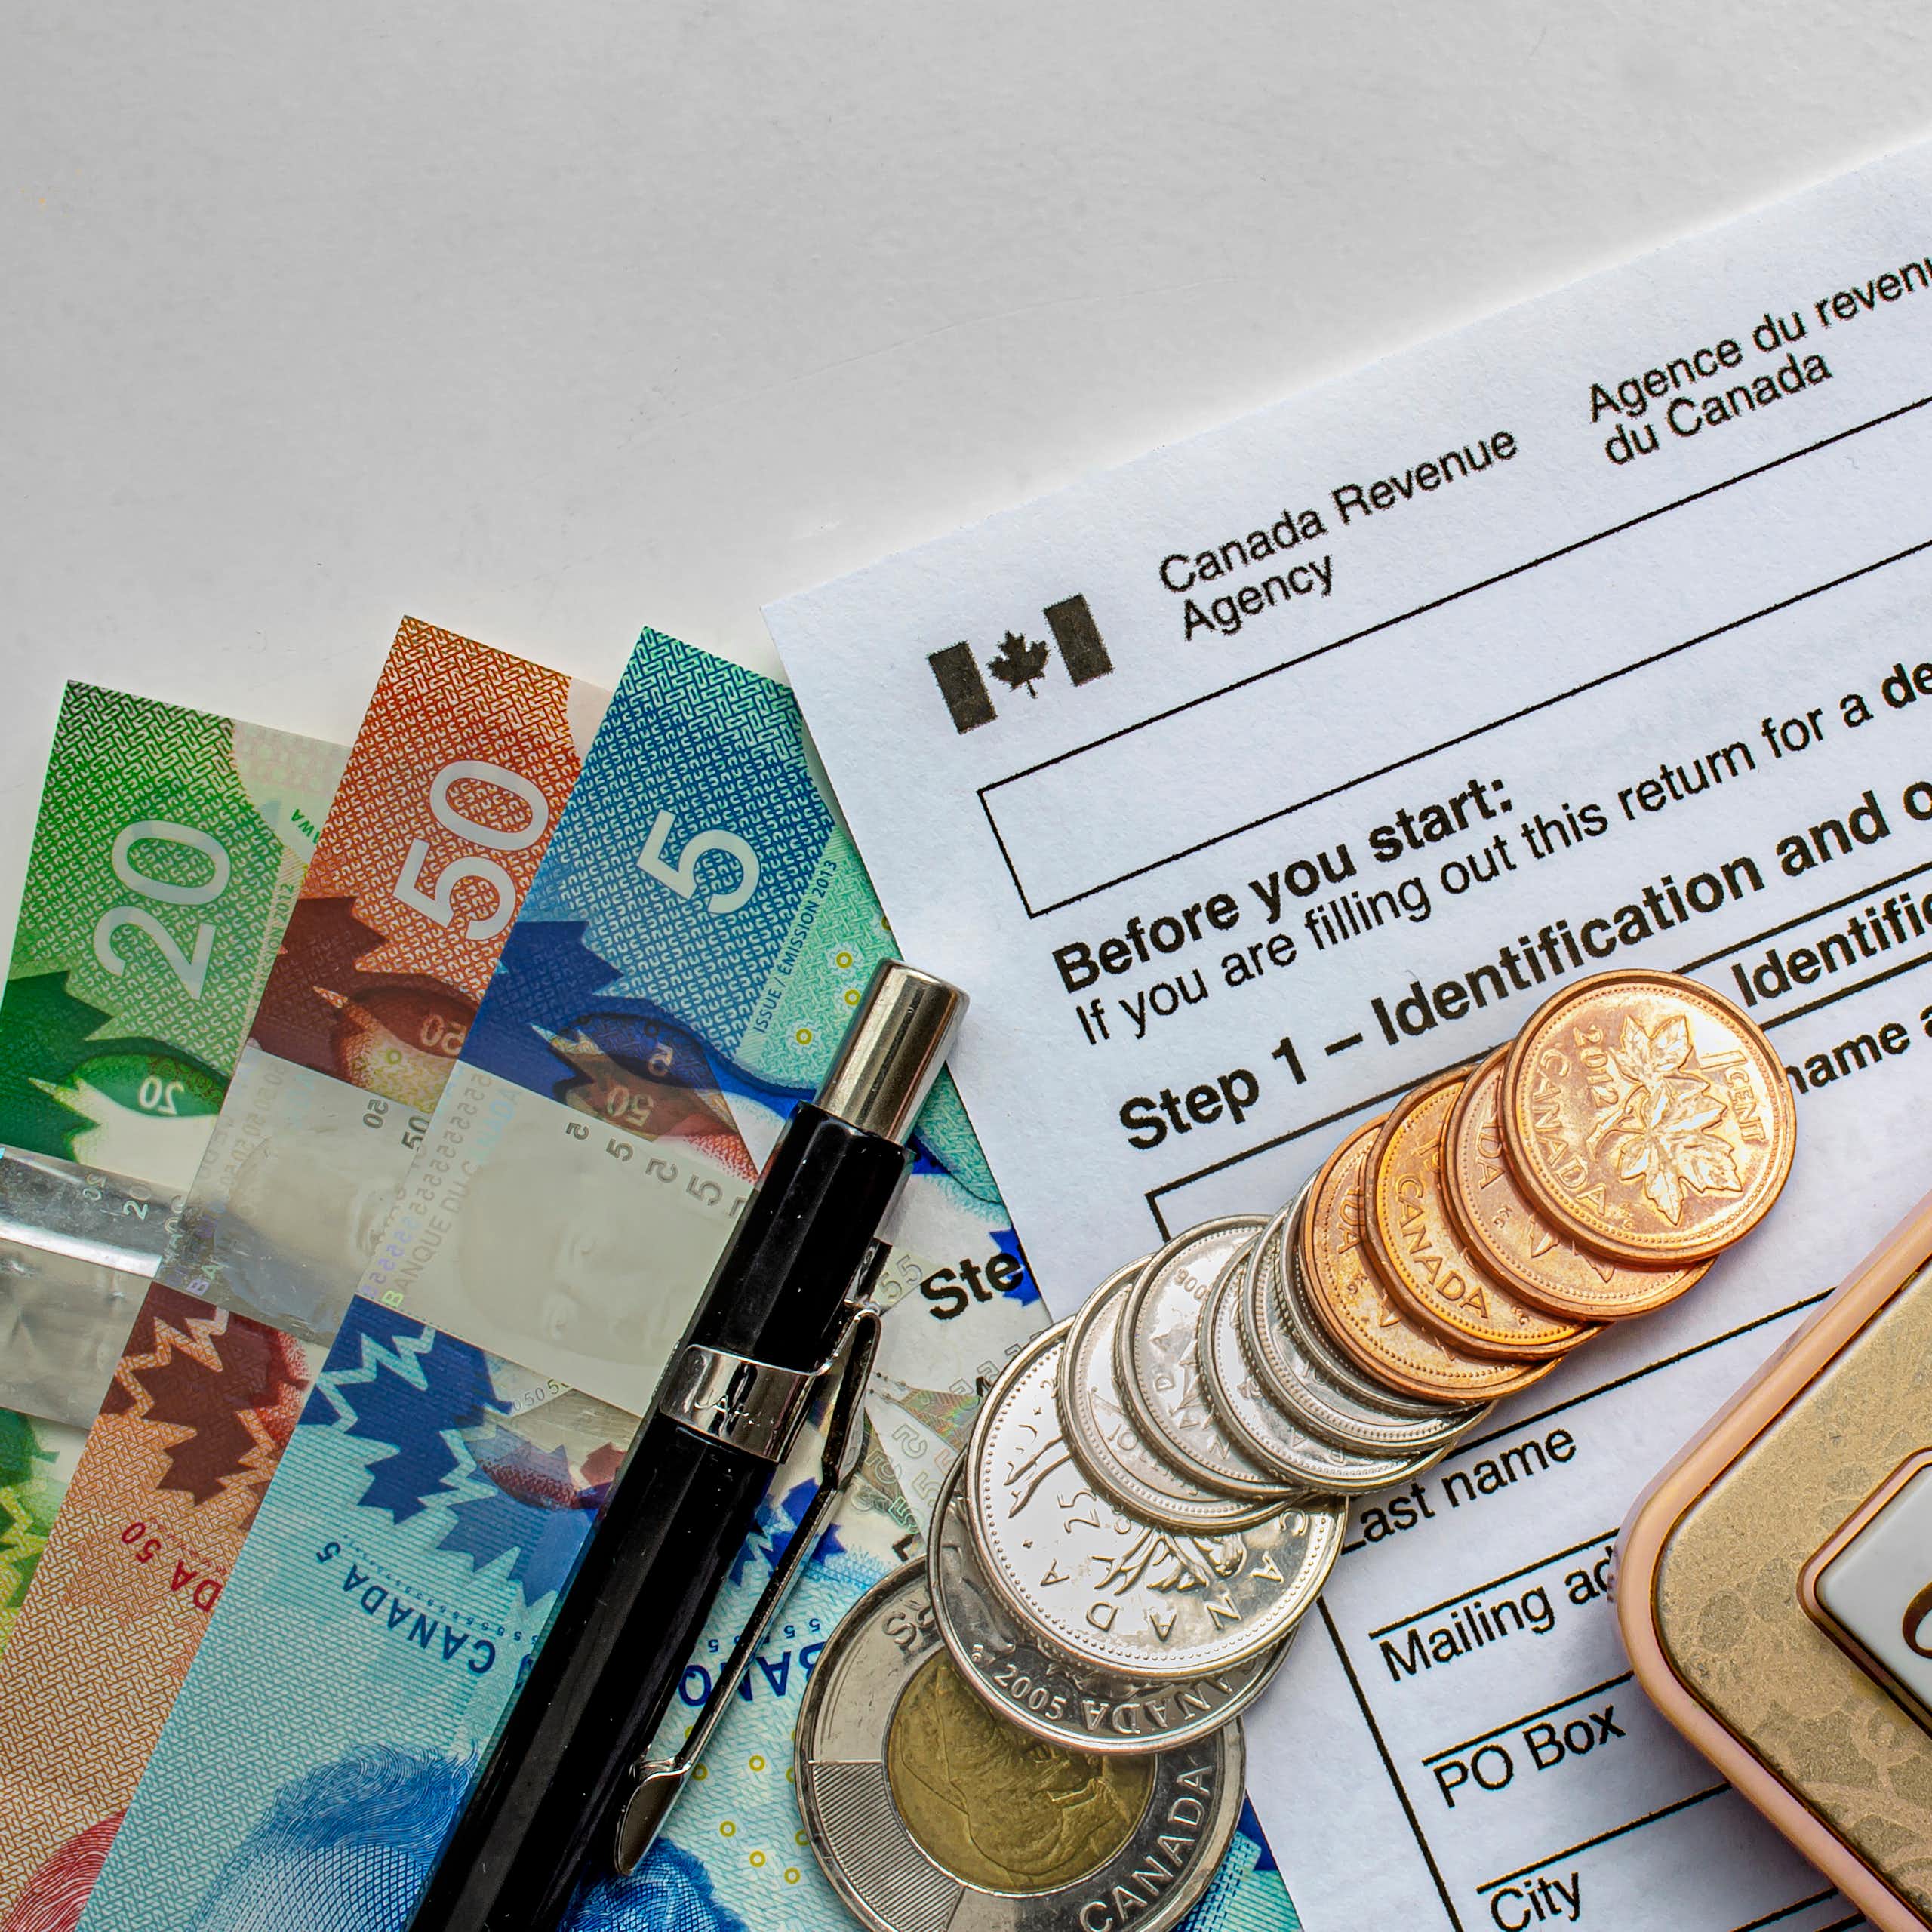 Canadian Tax Forms with coins, calculator, a pen and bills seen on a white table